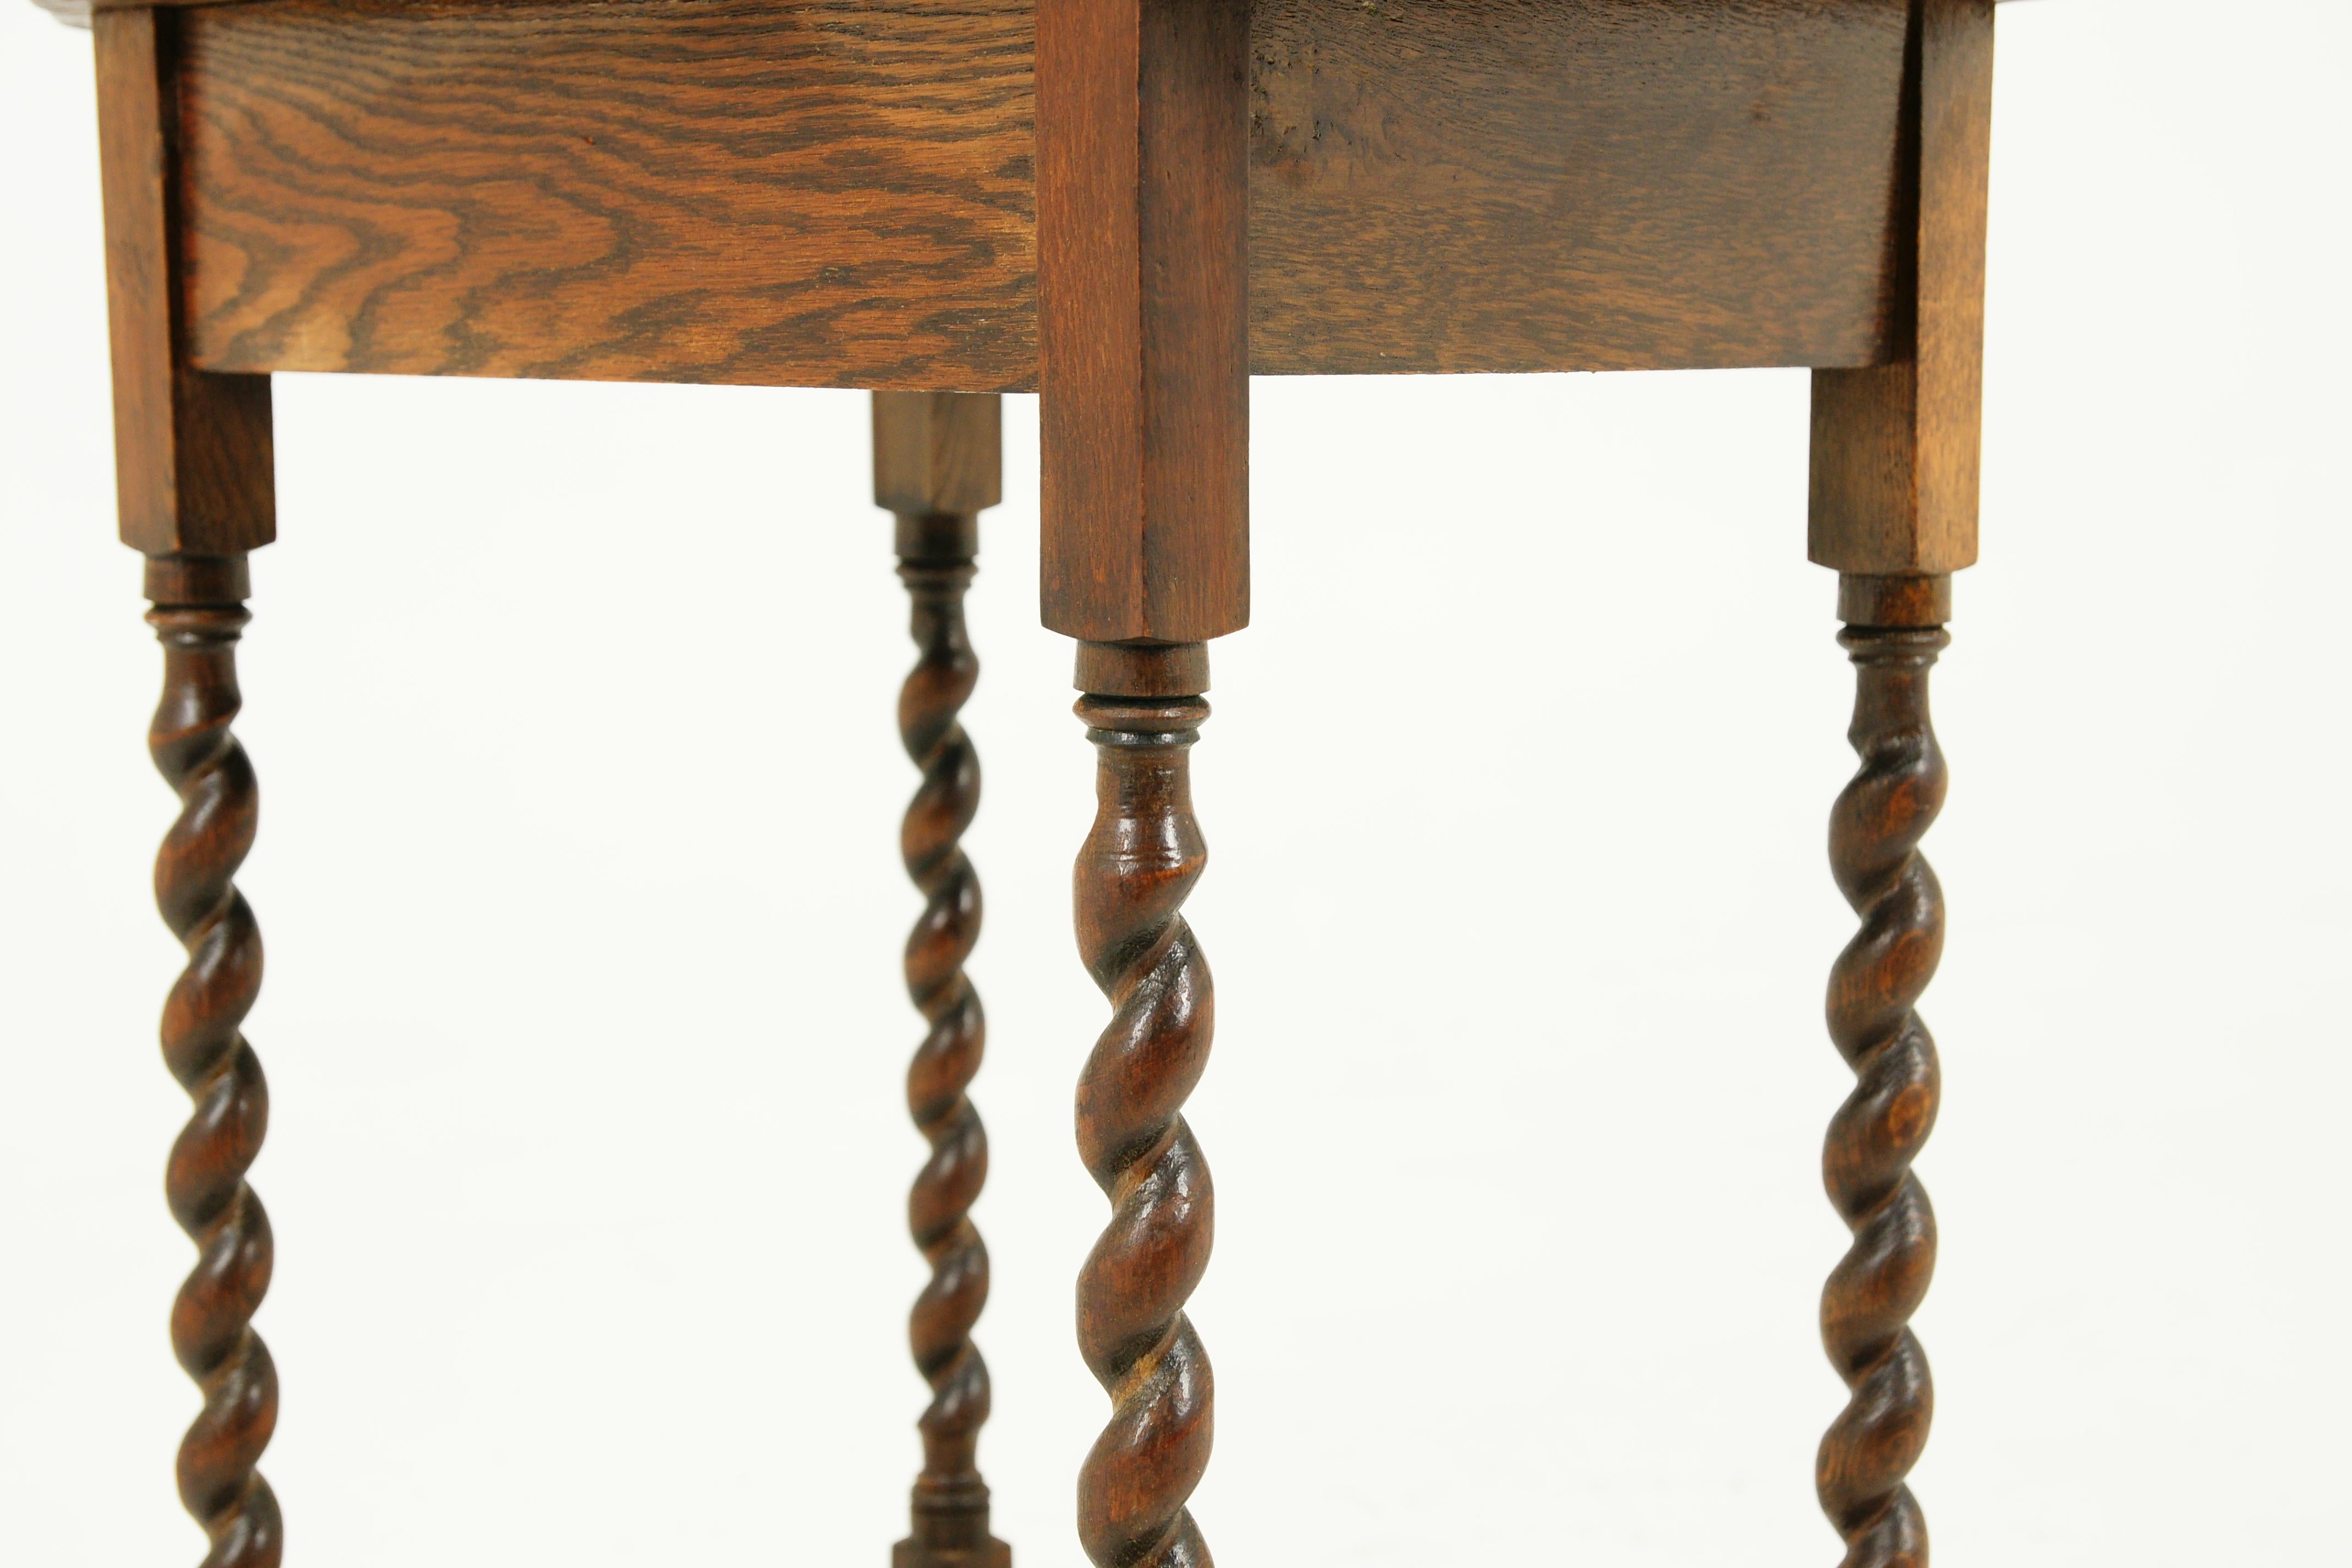 Hand-Crafted Antique Oval Barley Twist Table, Lamp Table, Scotland 1930, B2419